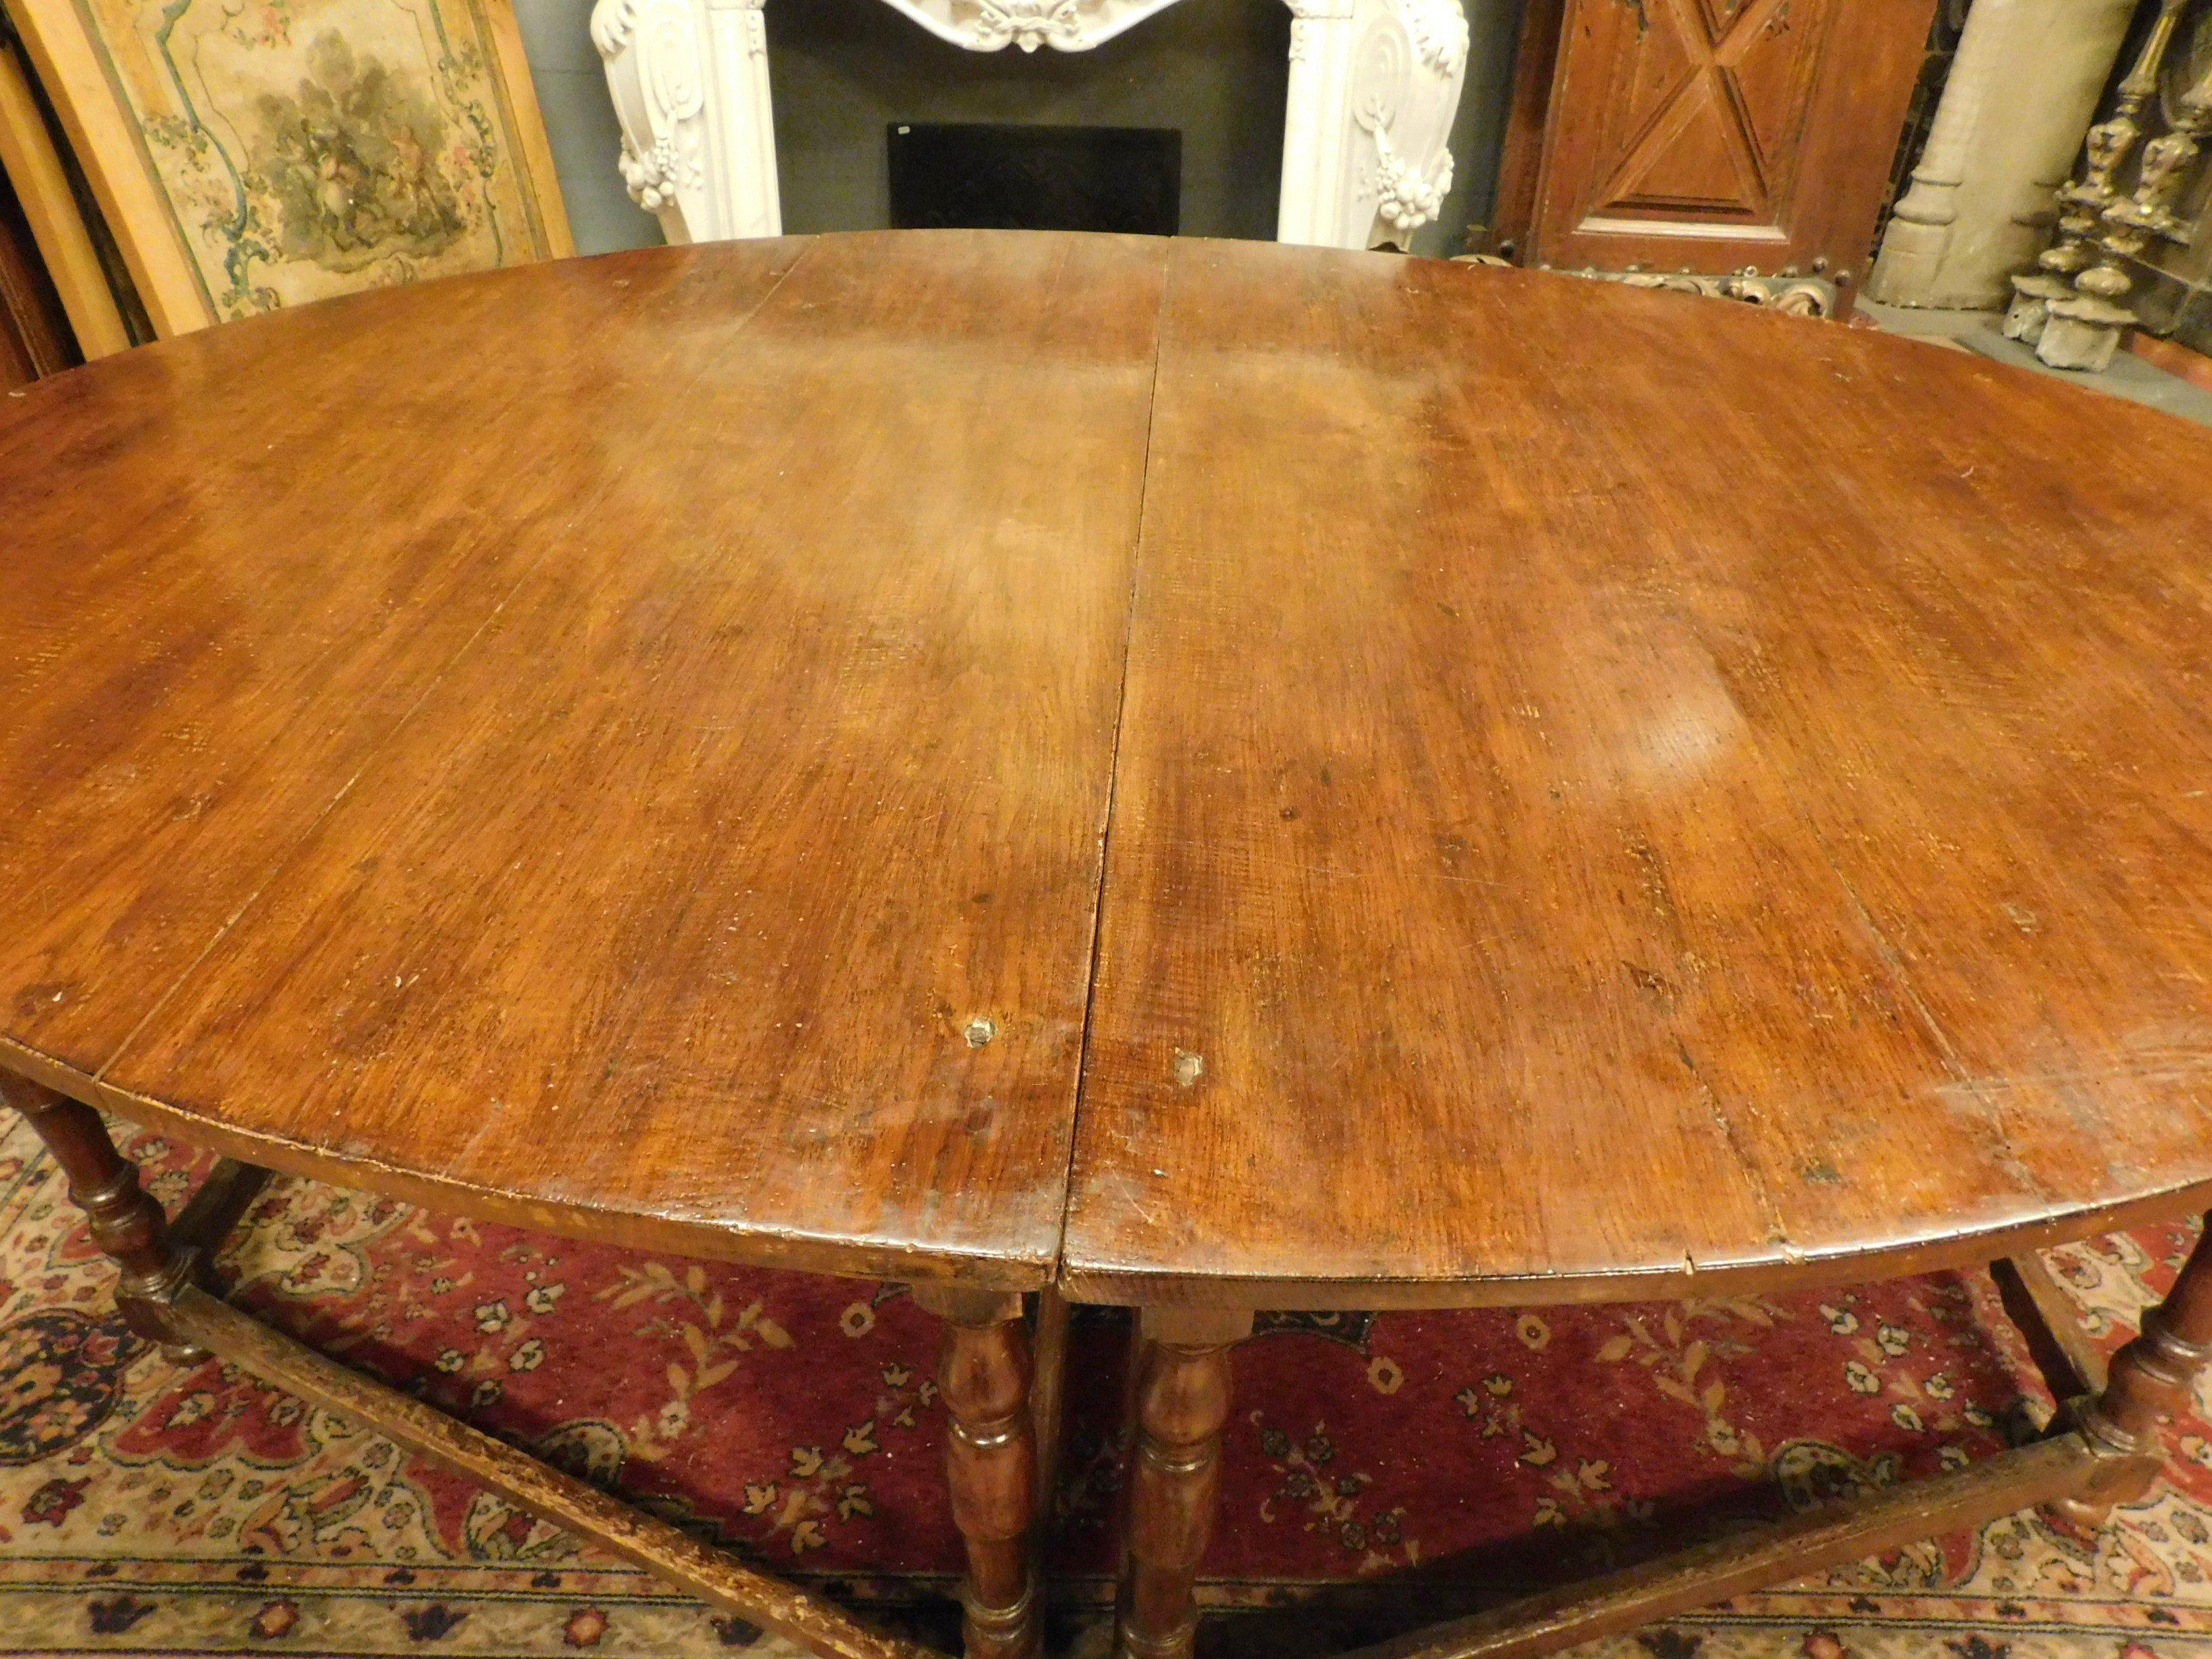 Antique Oval Table in Beechwood, Divisible 2 Half-Moons with 8 Legs, 1600, Italy For Sale 5